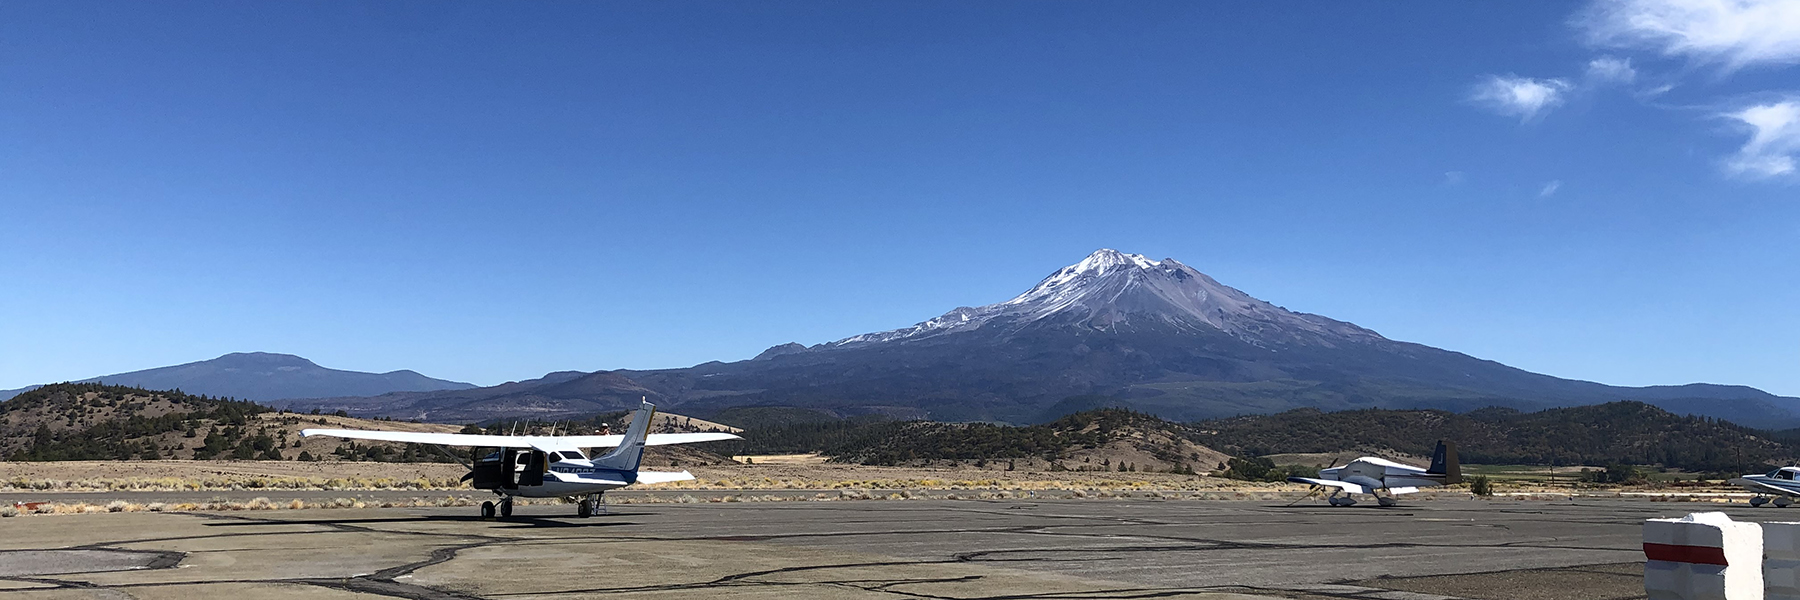 a plane sitting on the tarmac, snow capped mountain in the background